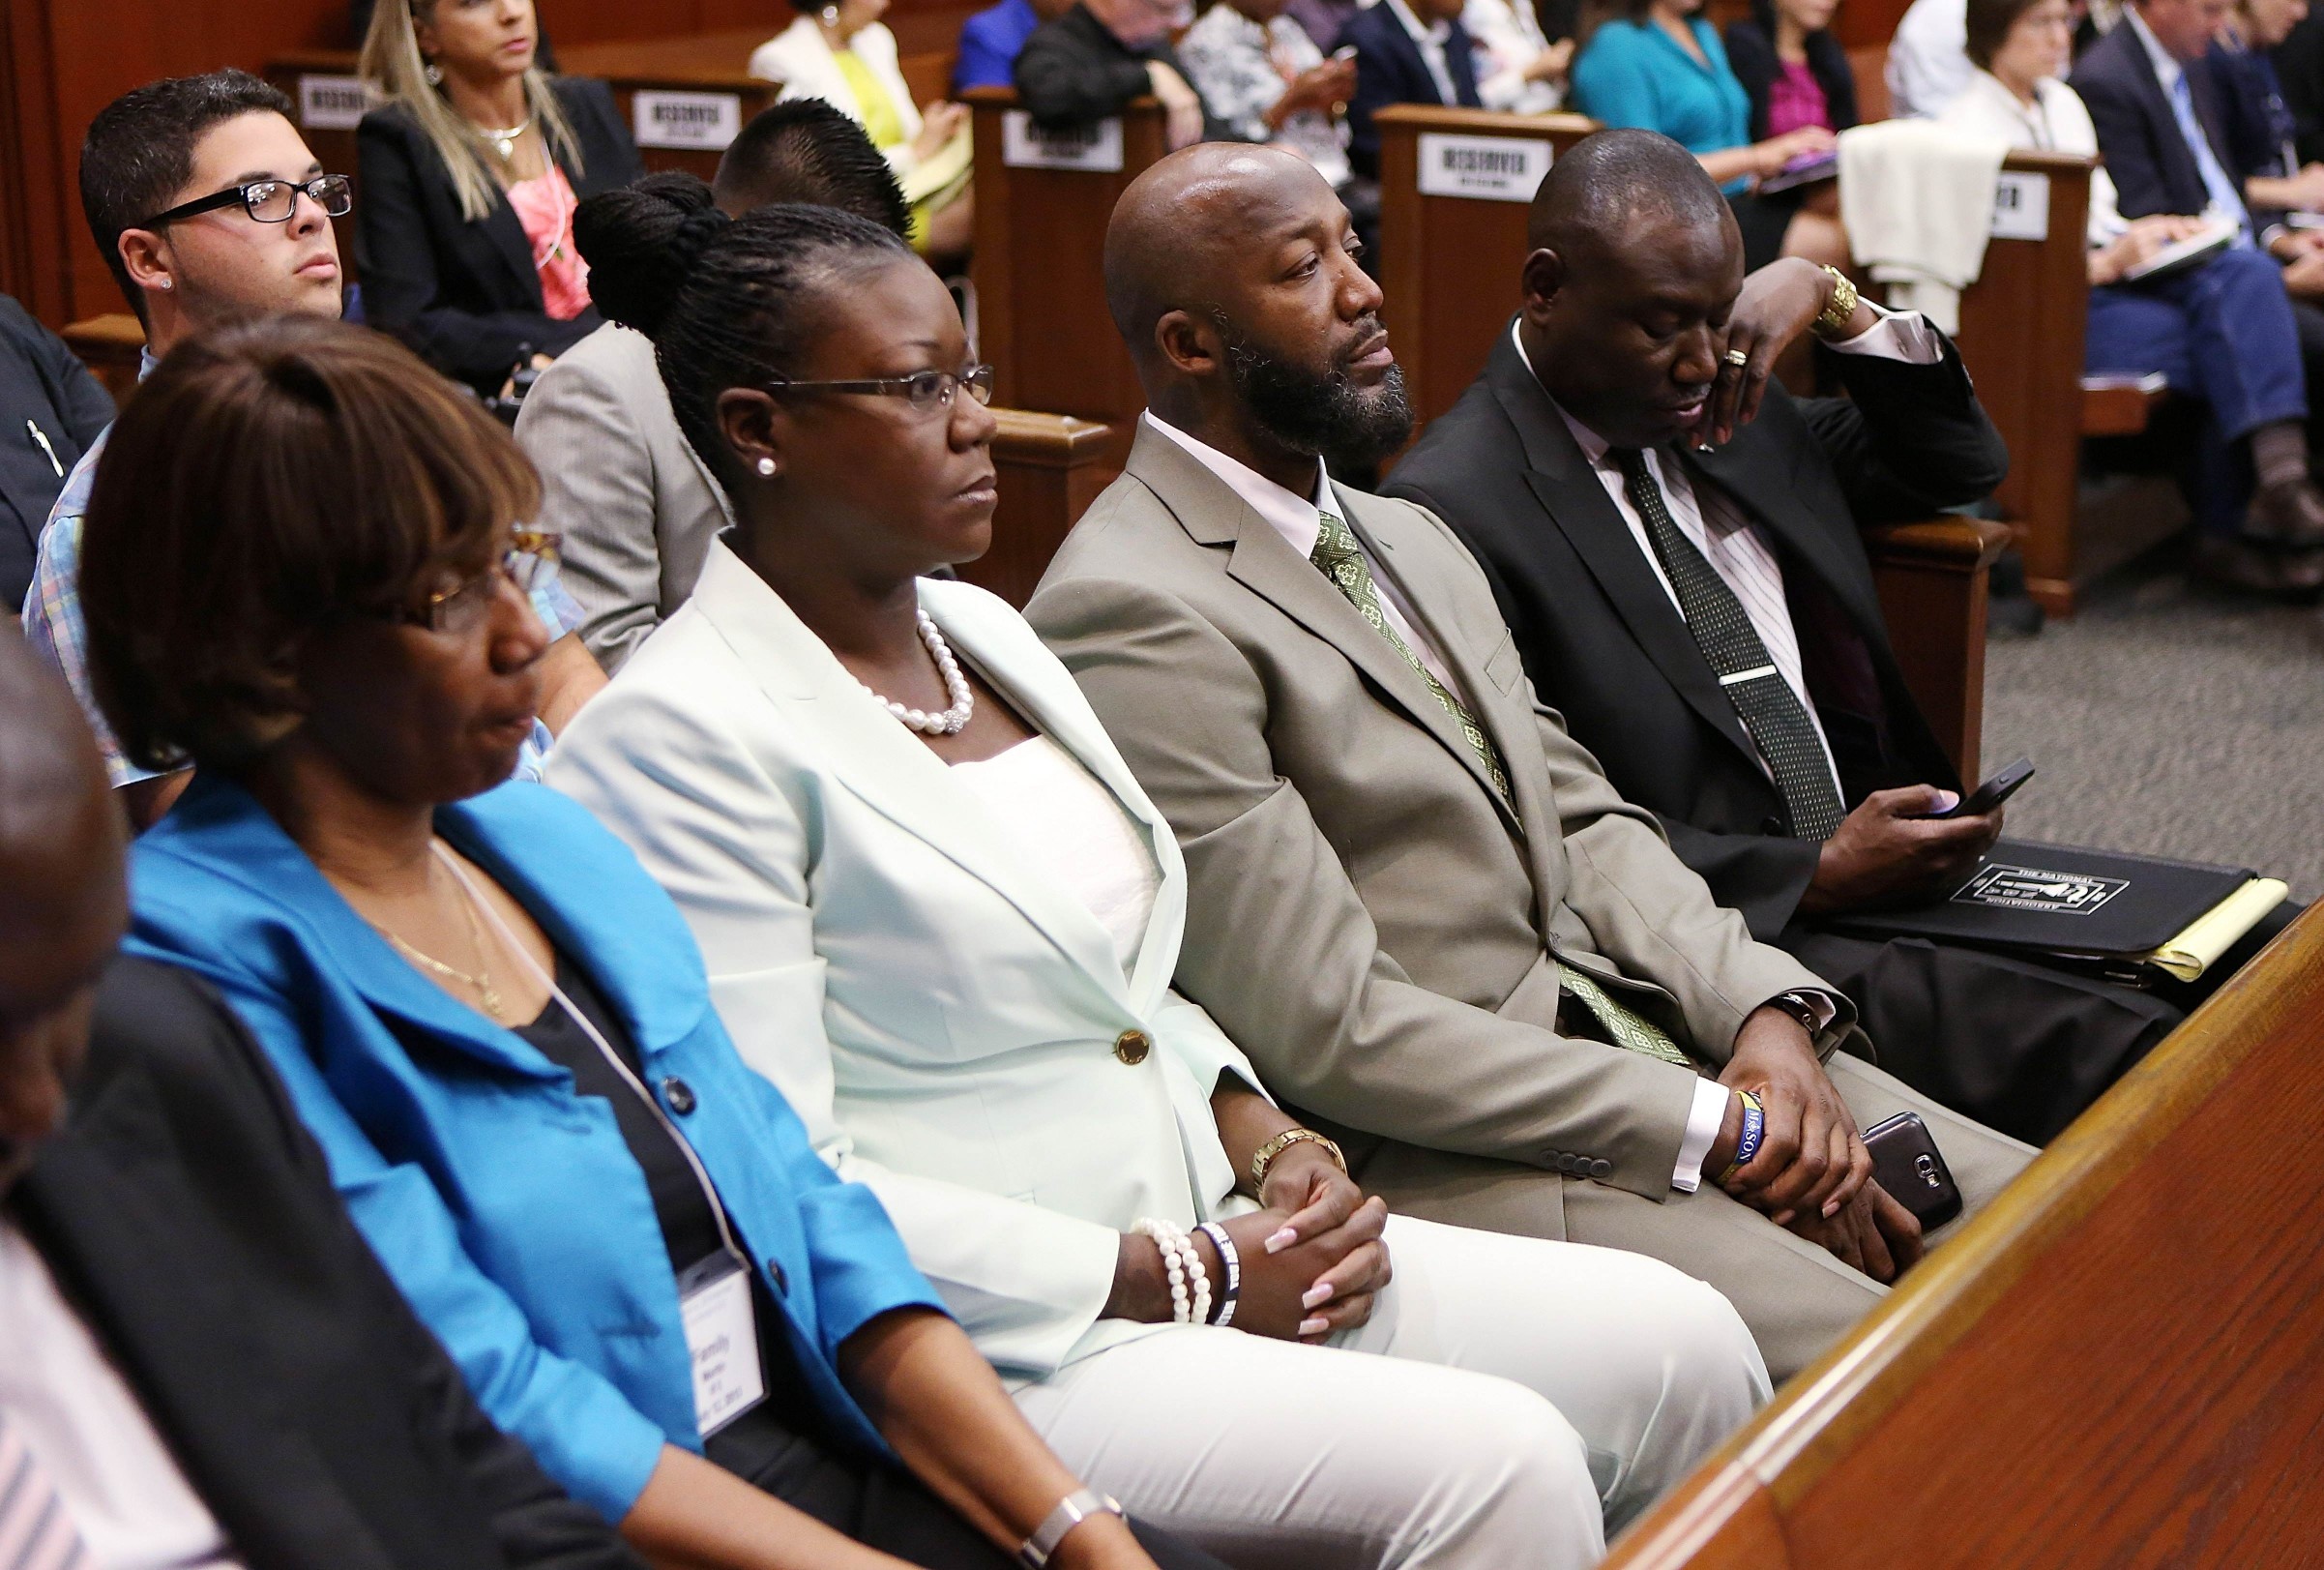 Sybrina Fulton (2nd left) and Tracy Martin (3rd left), Trayvon Martin's parents, and family lawyer Benjamin Crump (4th left) sit in court during George Zimmerman's murder trial. Photo: AFP